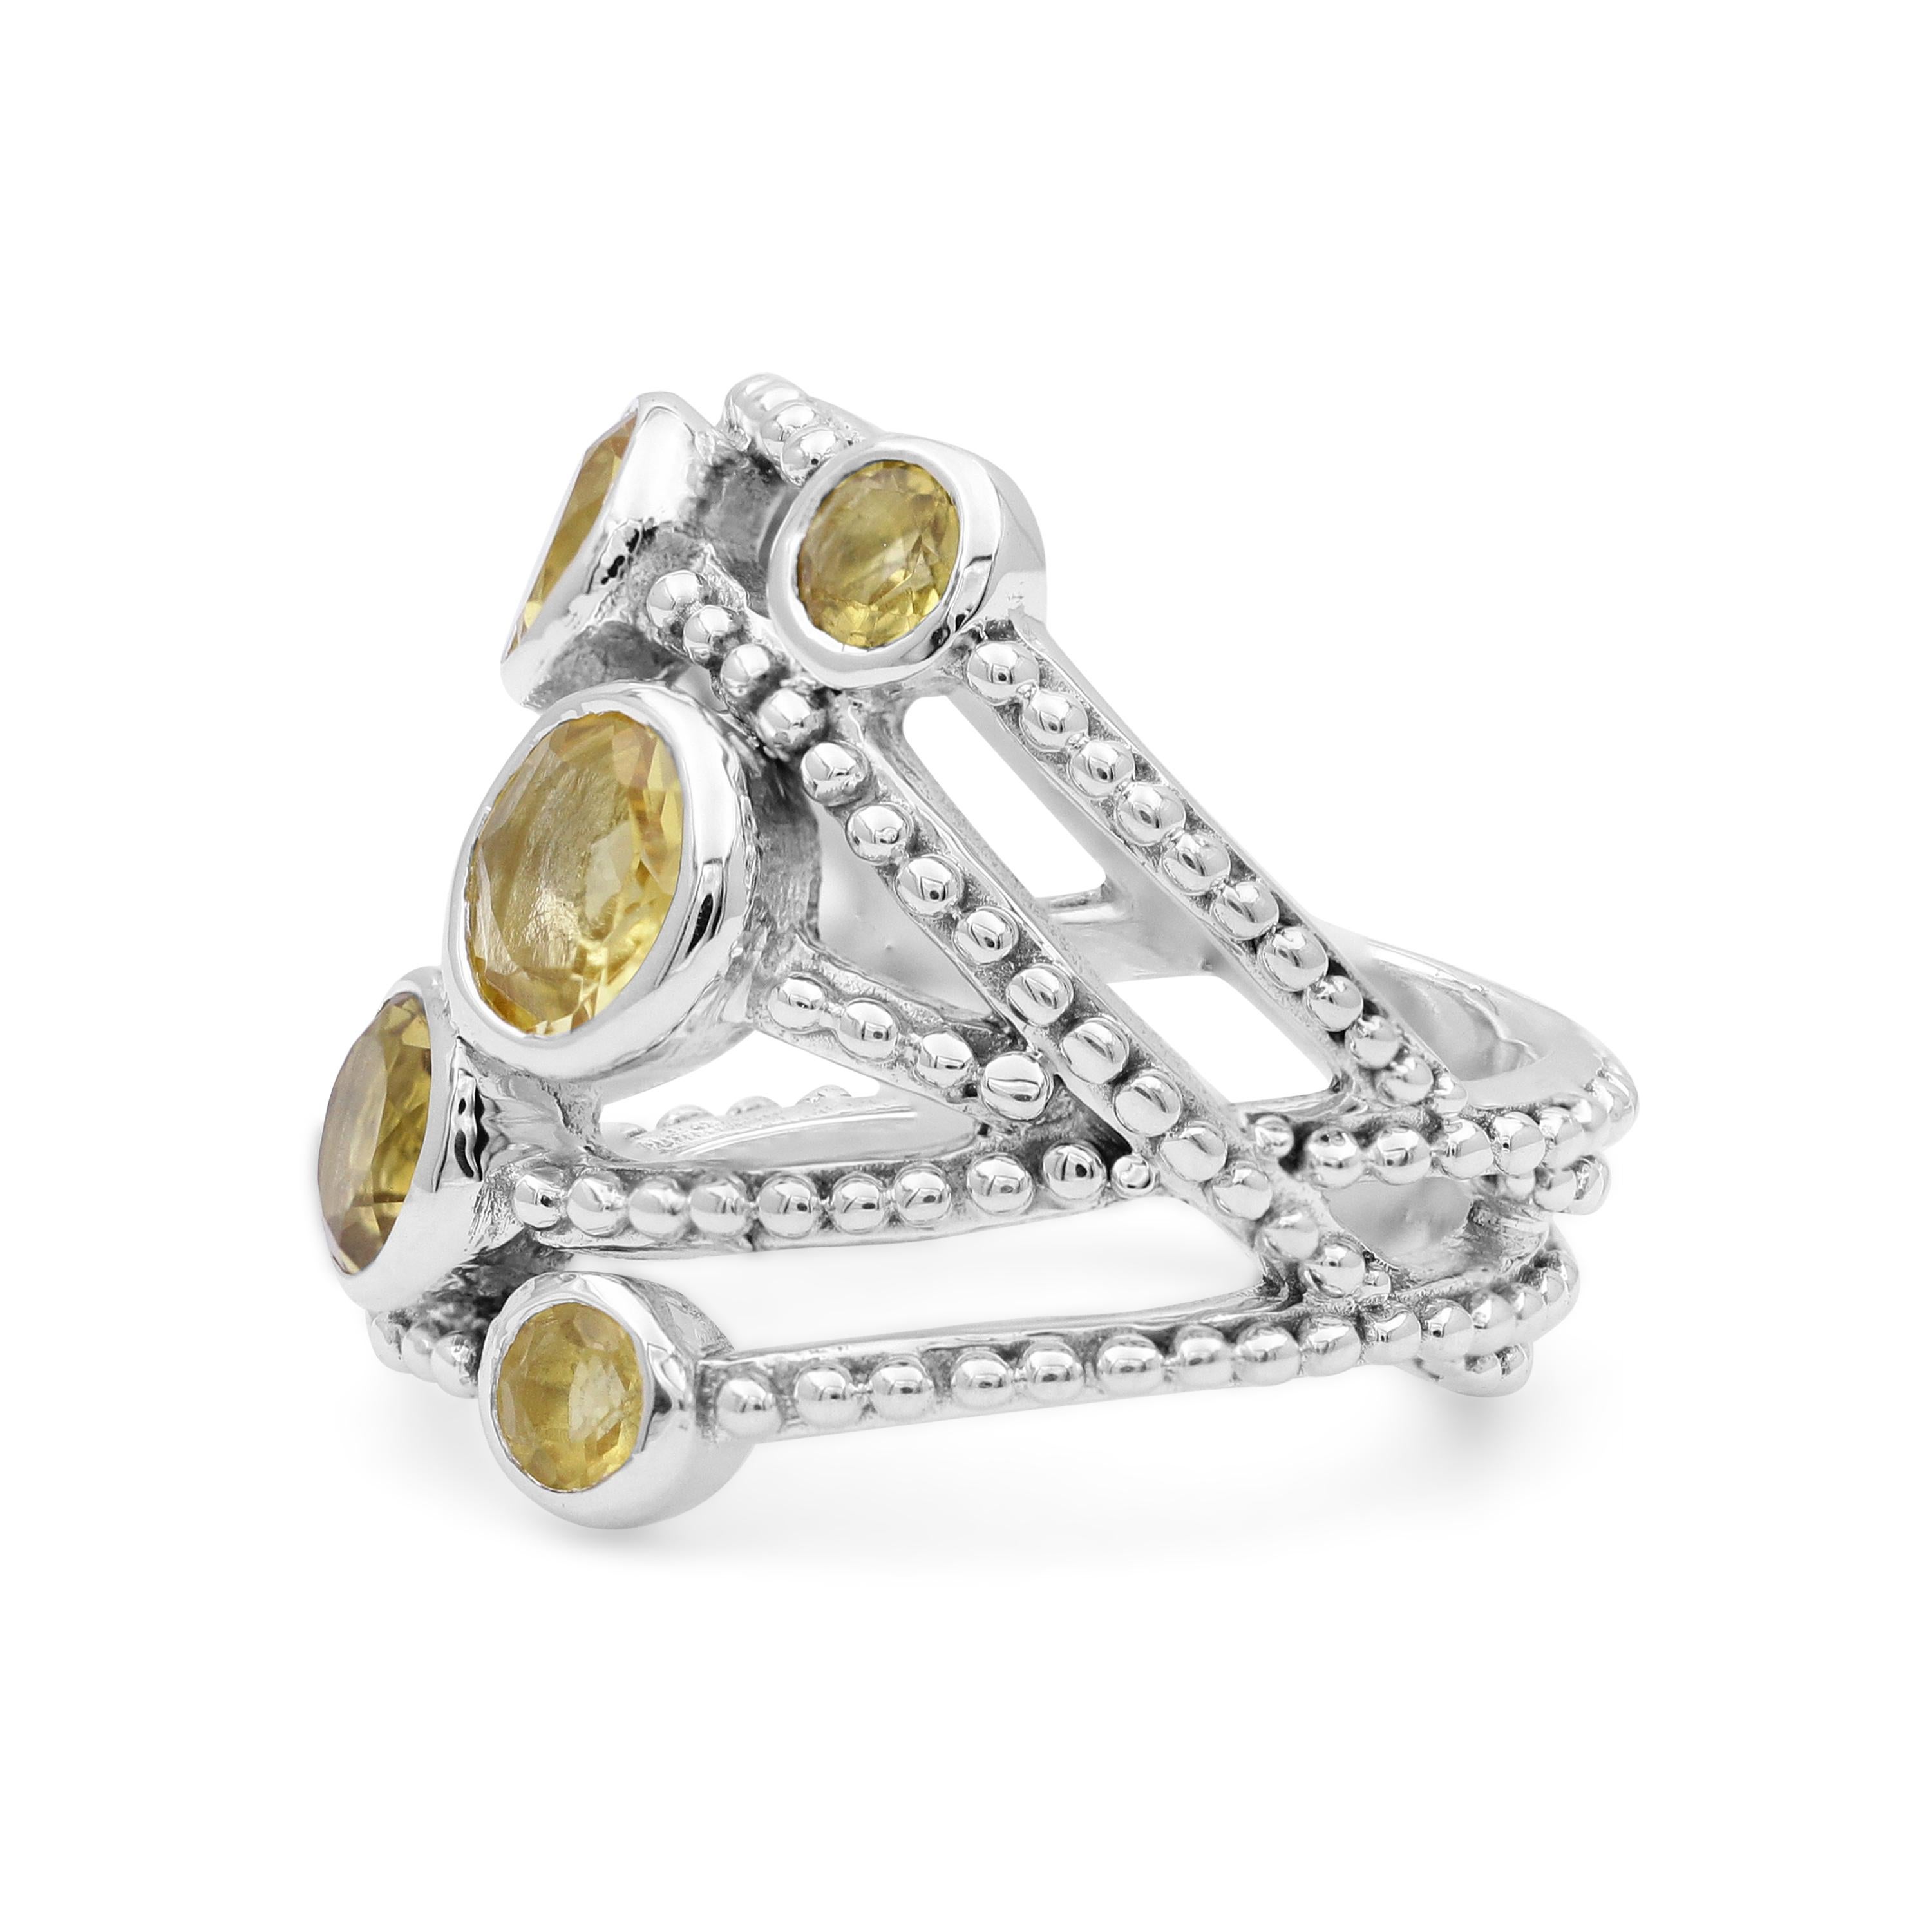 This bejeweled Stephen Dweck Sterling Silver Statement Ring features beaded rows of sterling silver flattered with vibrant bezel set Citrine (3mm-6mm). Drawing inspiration from a love of nature and passion for art, each Stephen Dweck creation is a